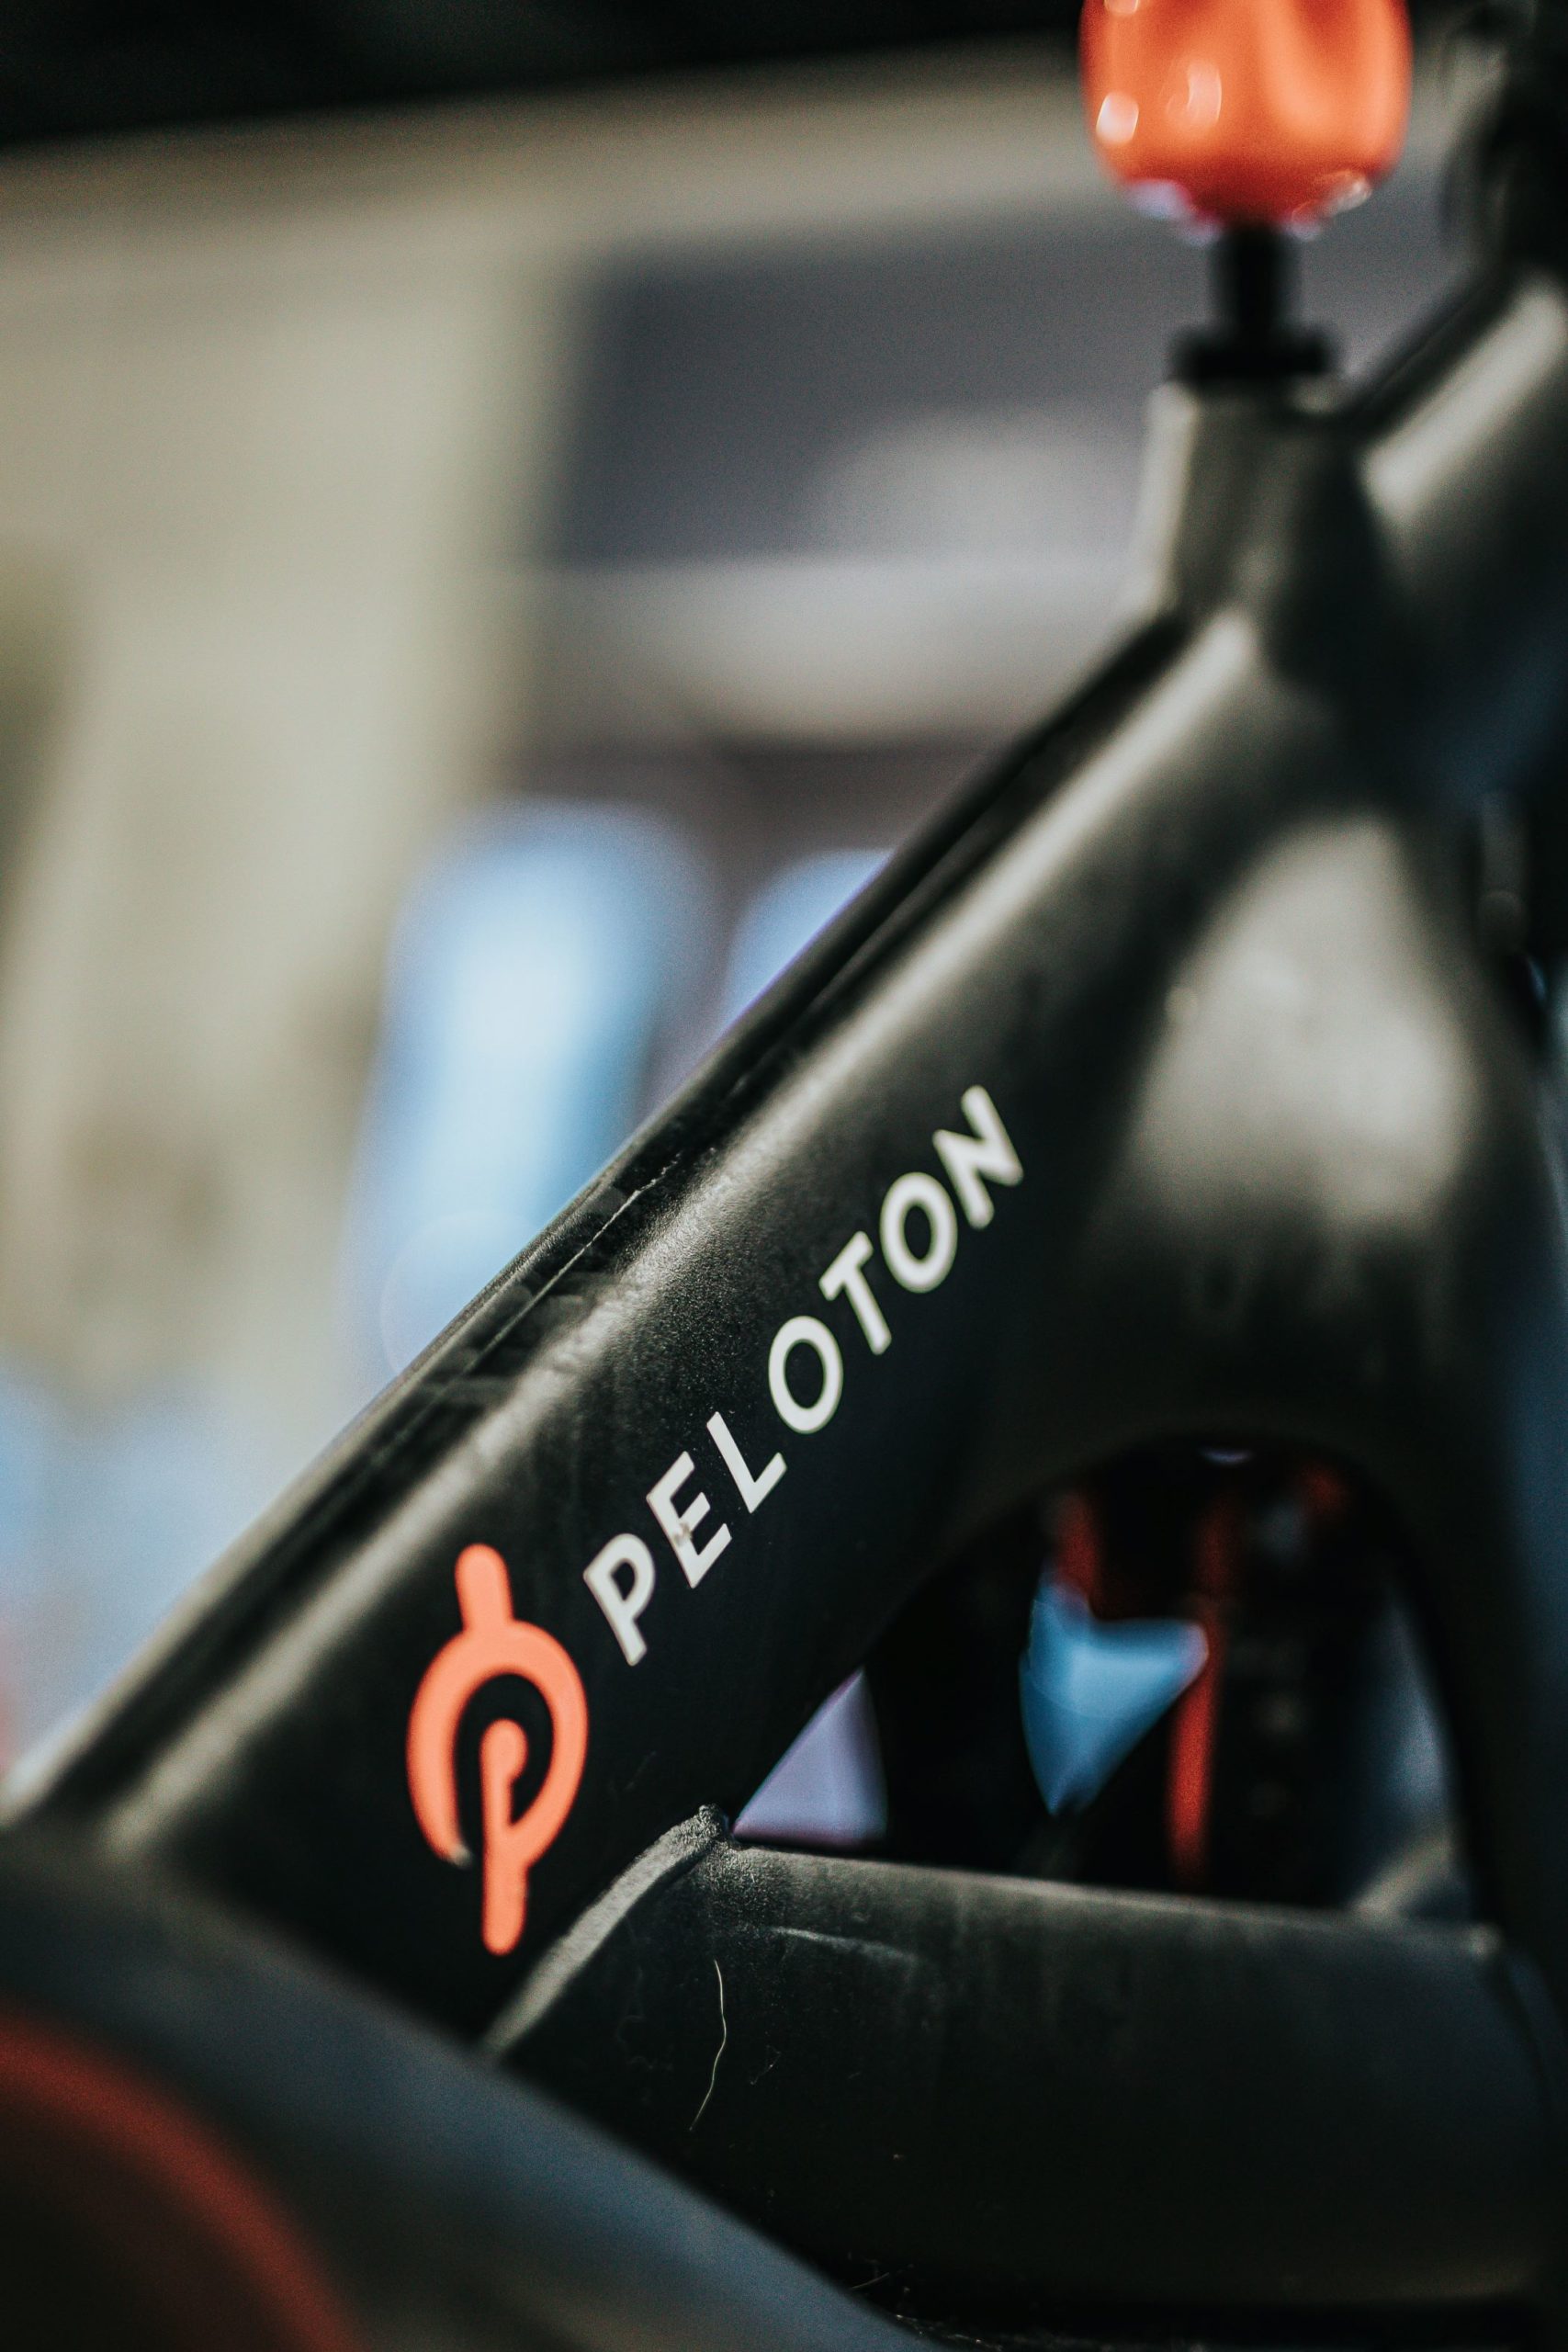 Can you use Peloton without subscription?